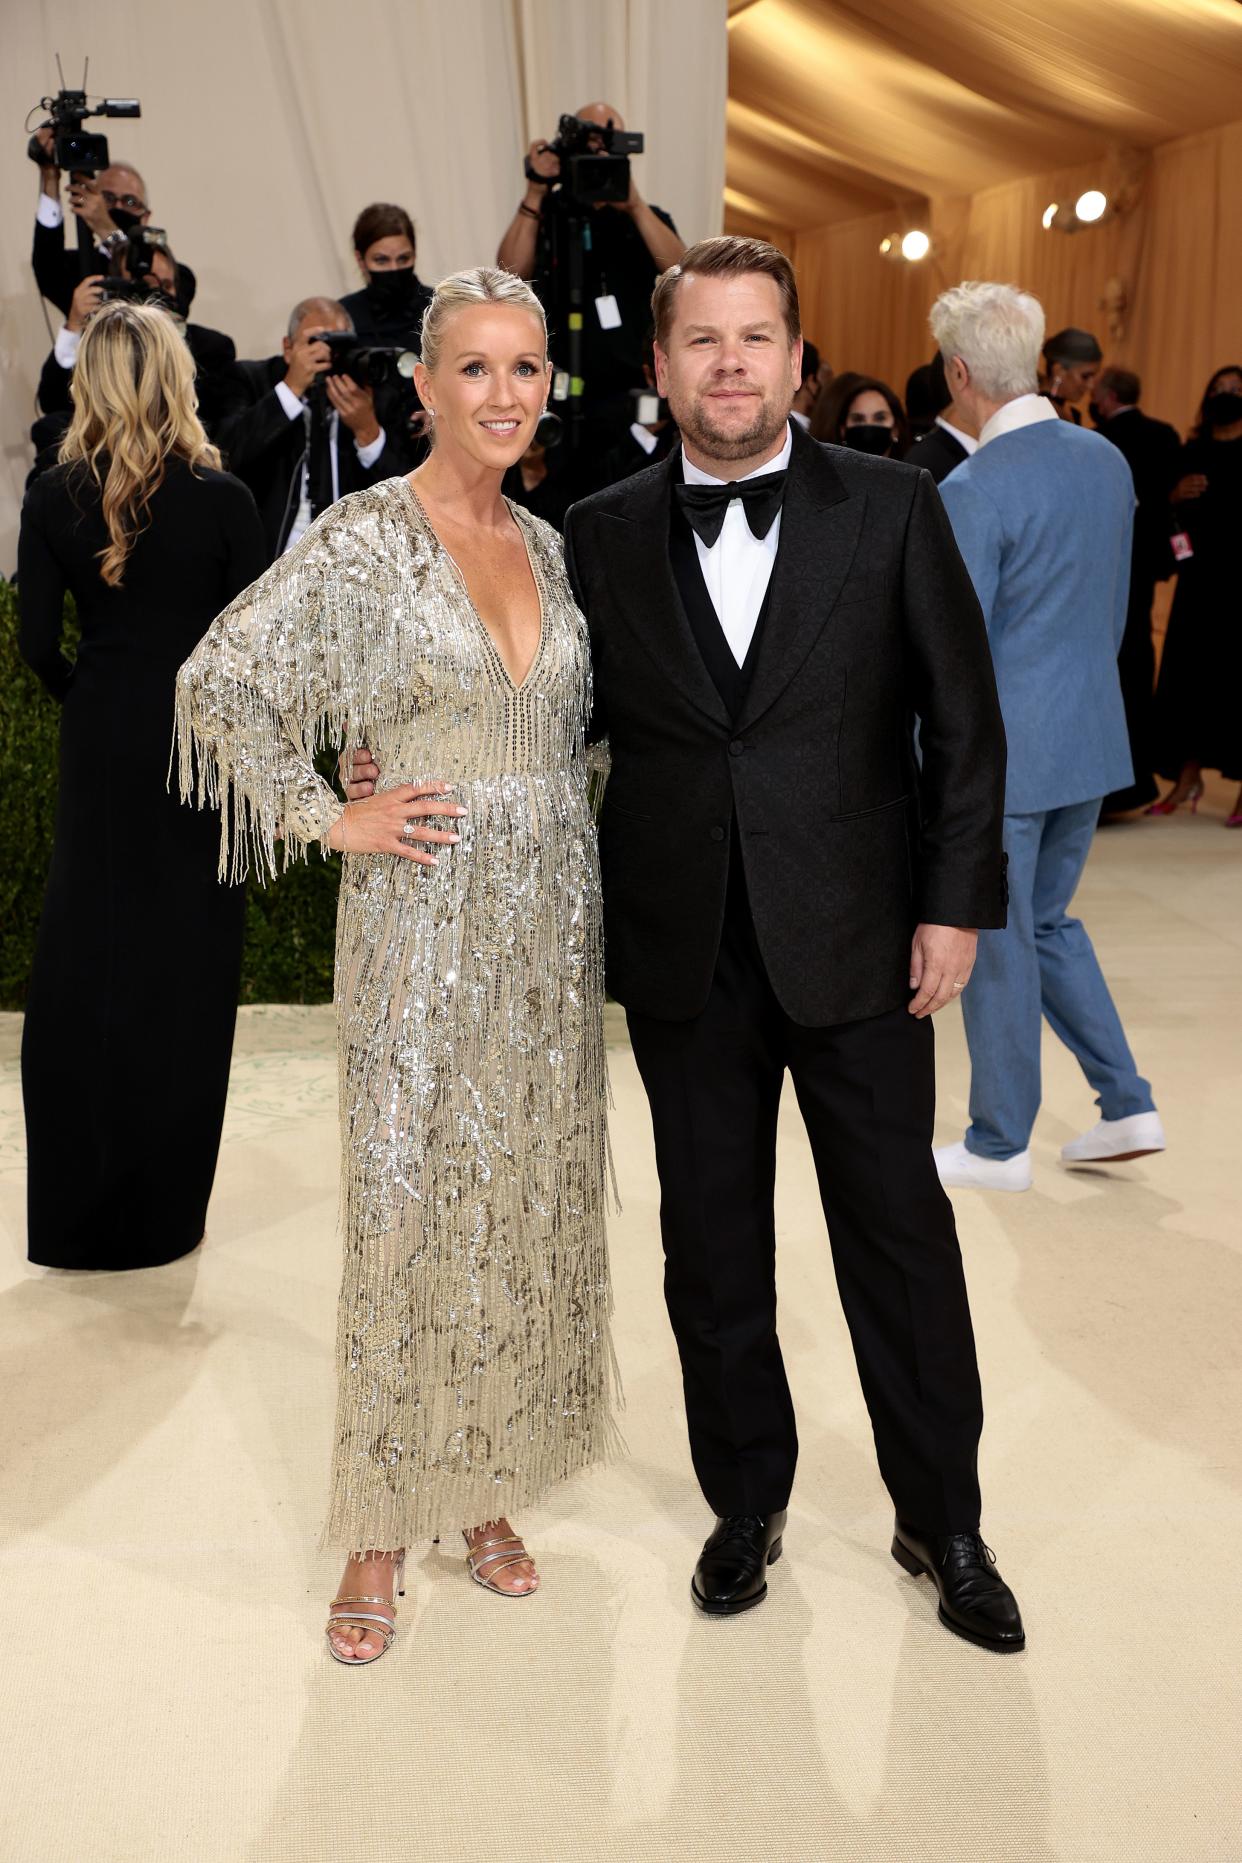 Julia Carey and James Corden attend The 2021 Met Gala Celebrating In America: A Lexicon Of Fashion at Metropolitan Museum of Art on Sept. 13, 2021 in New York.